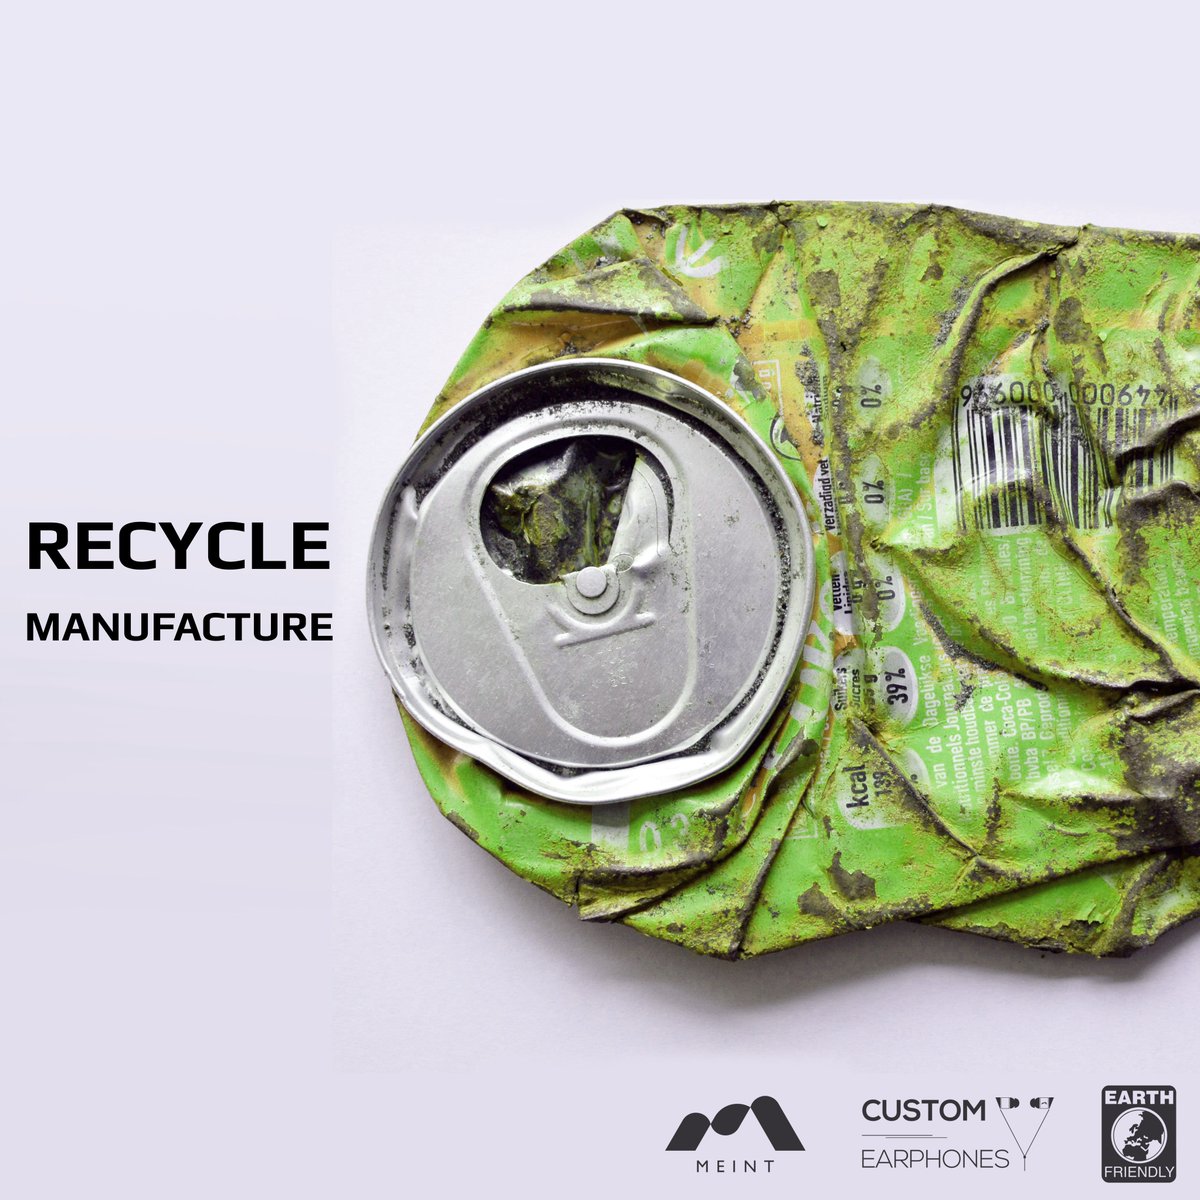 Many technology materials can be replaced with recycled resources that may cost more but in return keep our earth clean. 

#keepearthclean #recycling #pollution #environment #Manufacturing #technology #space #headphones #earphones #customearphones